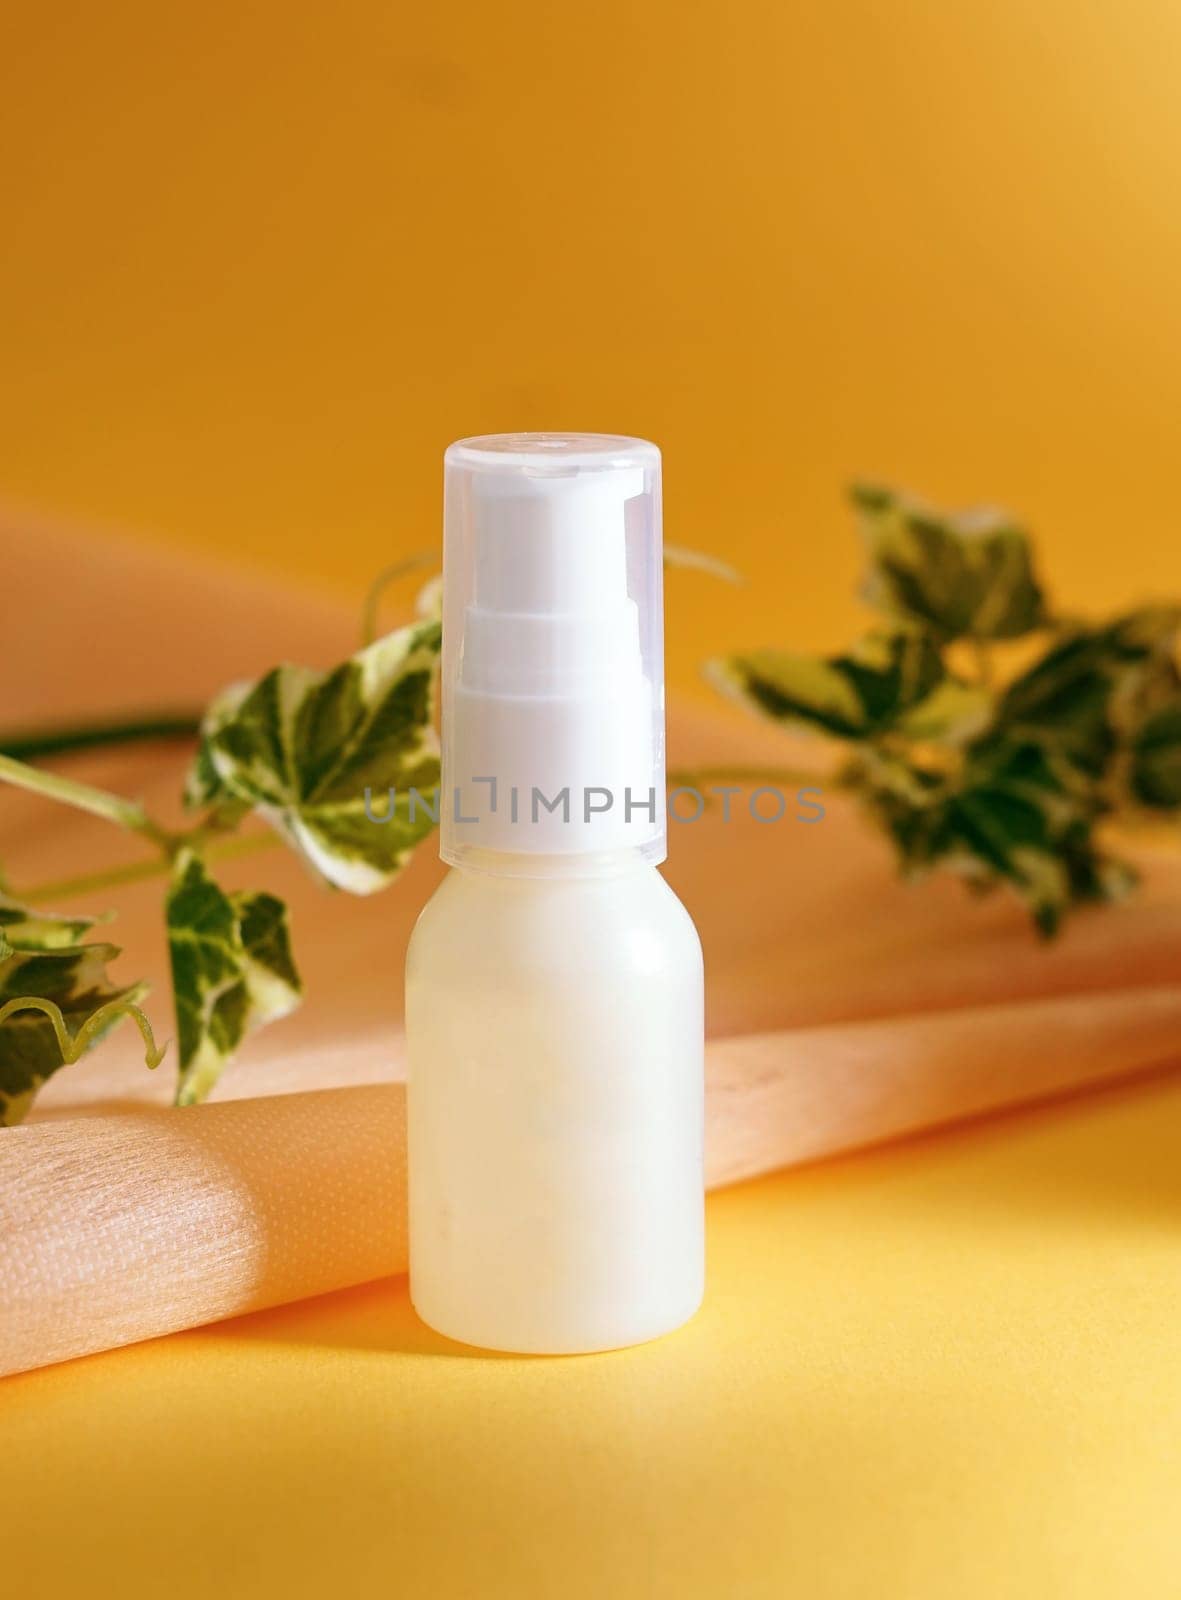 Unlabeled bottle of cosmetic or soap shower gel is displayed on an artistic background, product enclosure for liquid product for promotional and marketing purpose